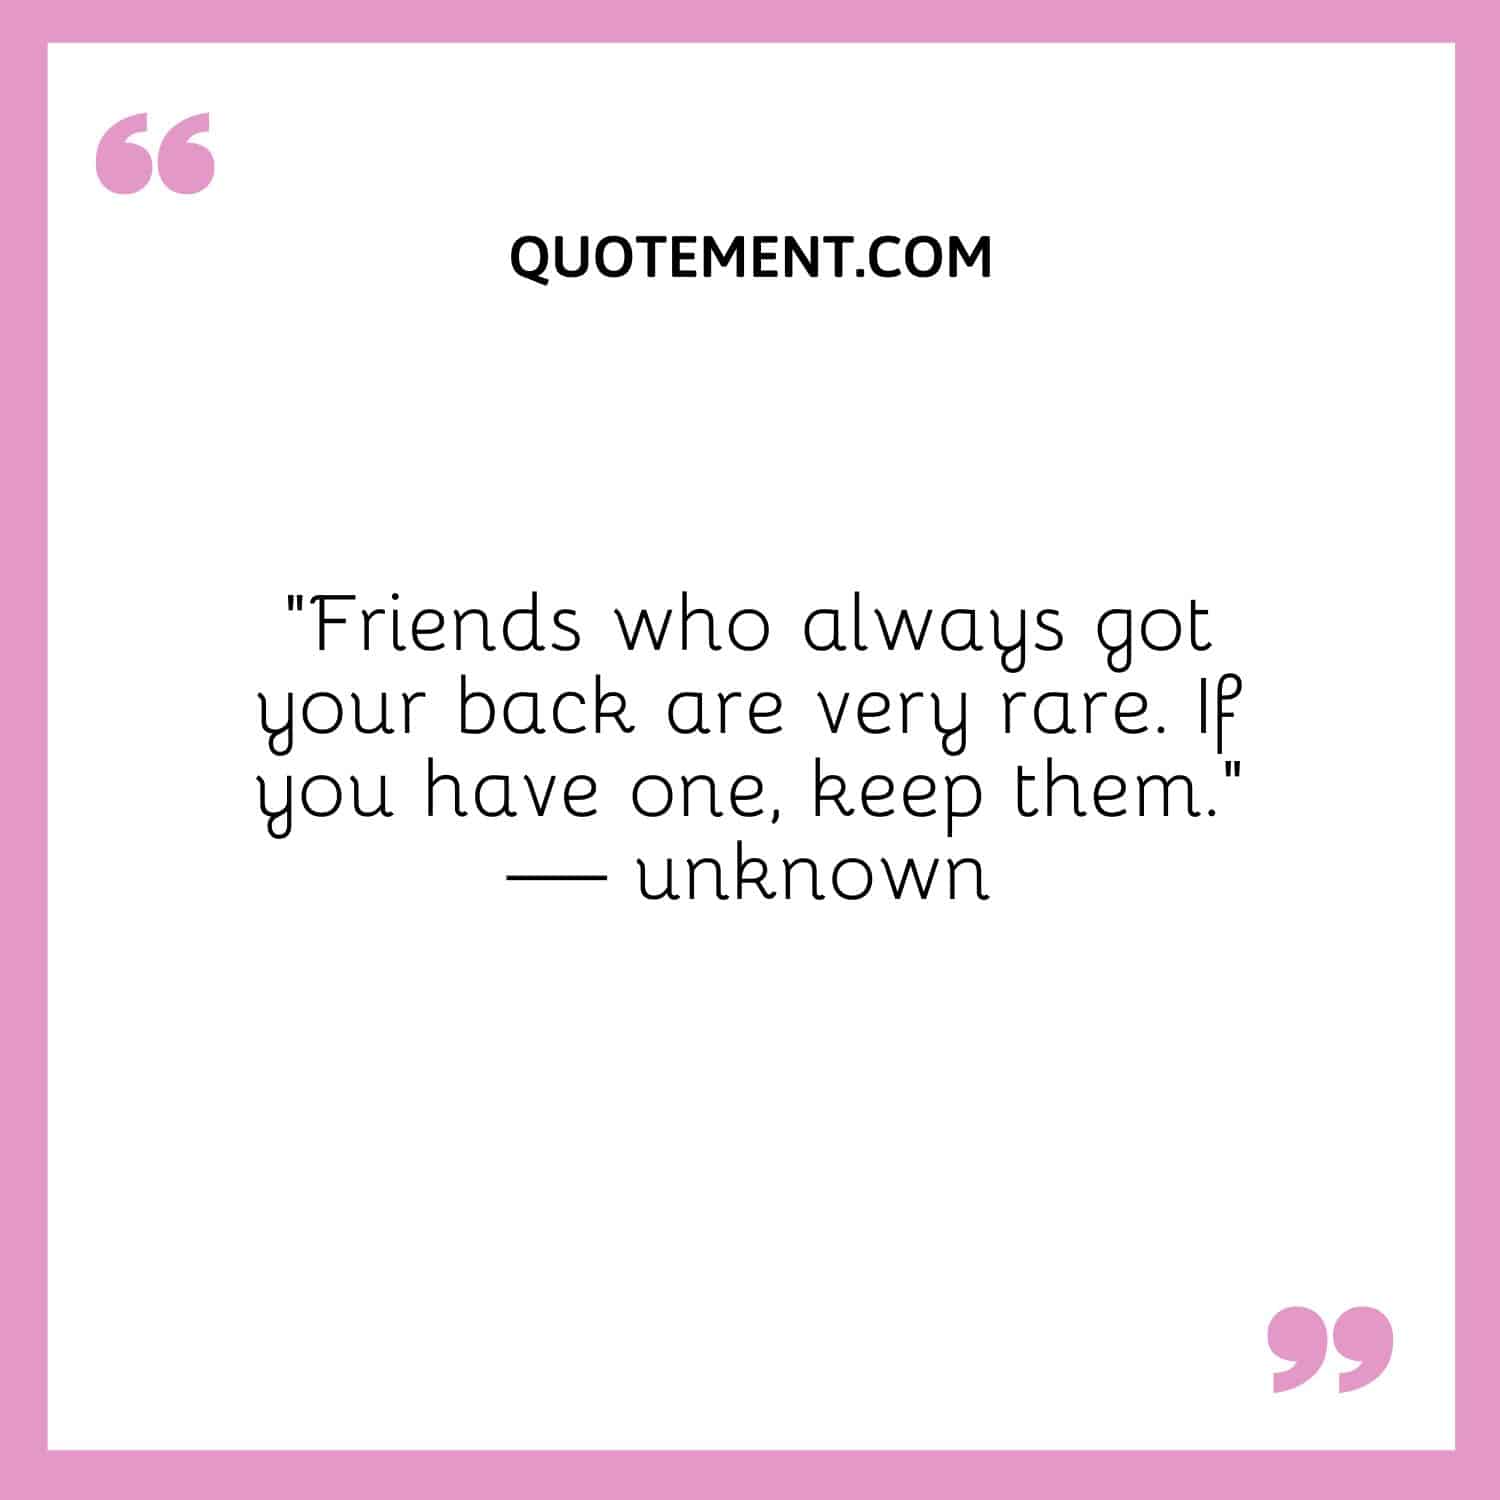 Friends who always got your back are very rare